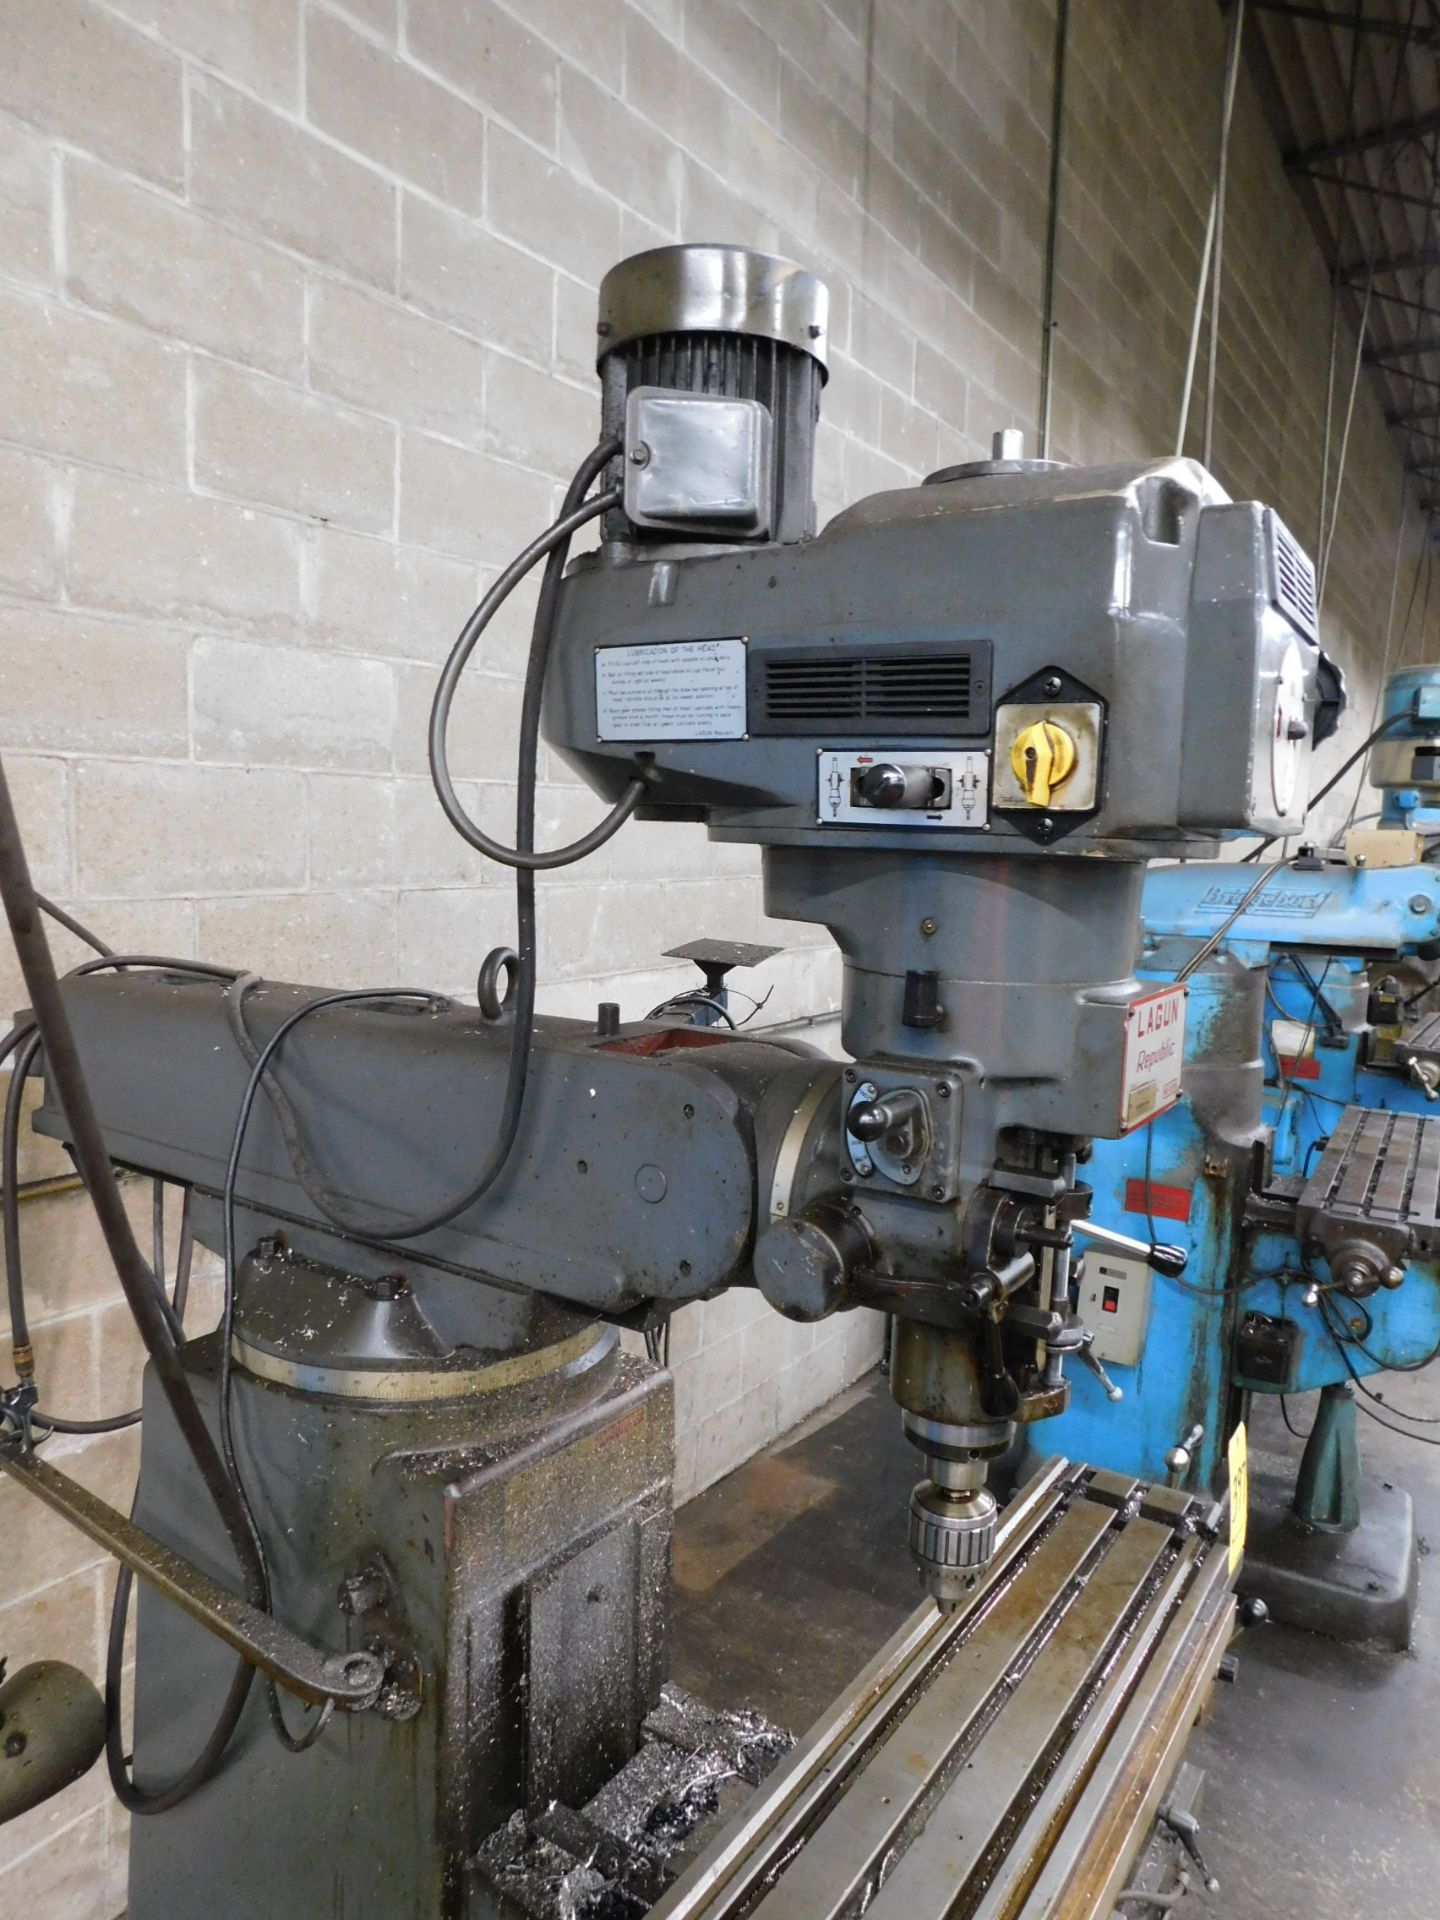 Lagun Model FTV-2 Vertical Mill, s/n SE17835, Variable Speed, 3 HP, R-8 Spindle, 9” X 48” Table, - Image 7 of 11